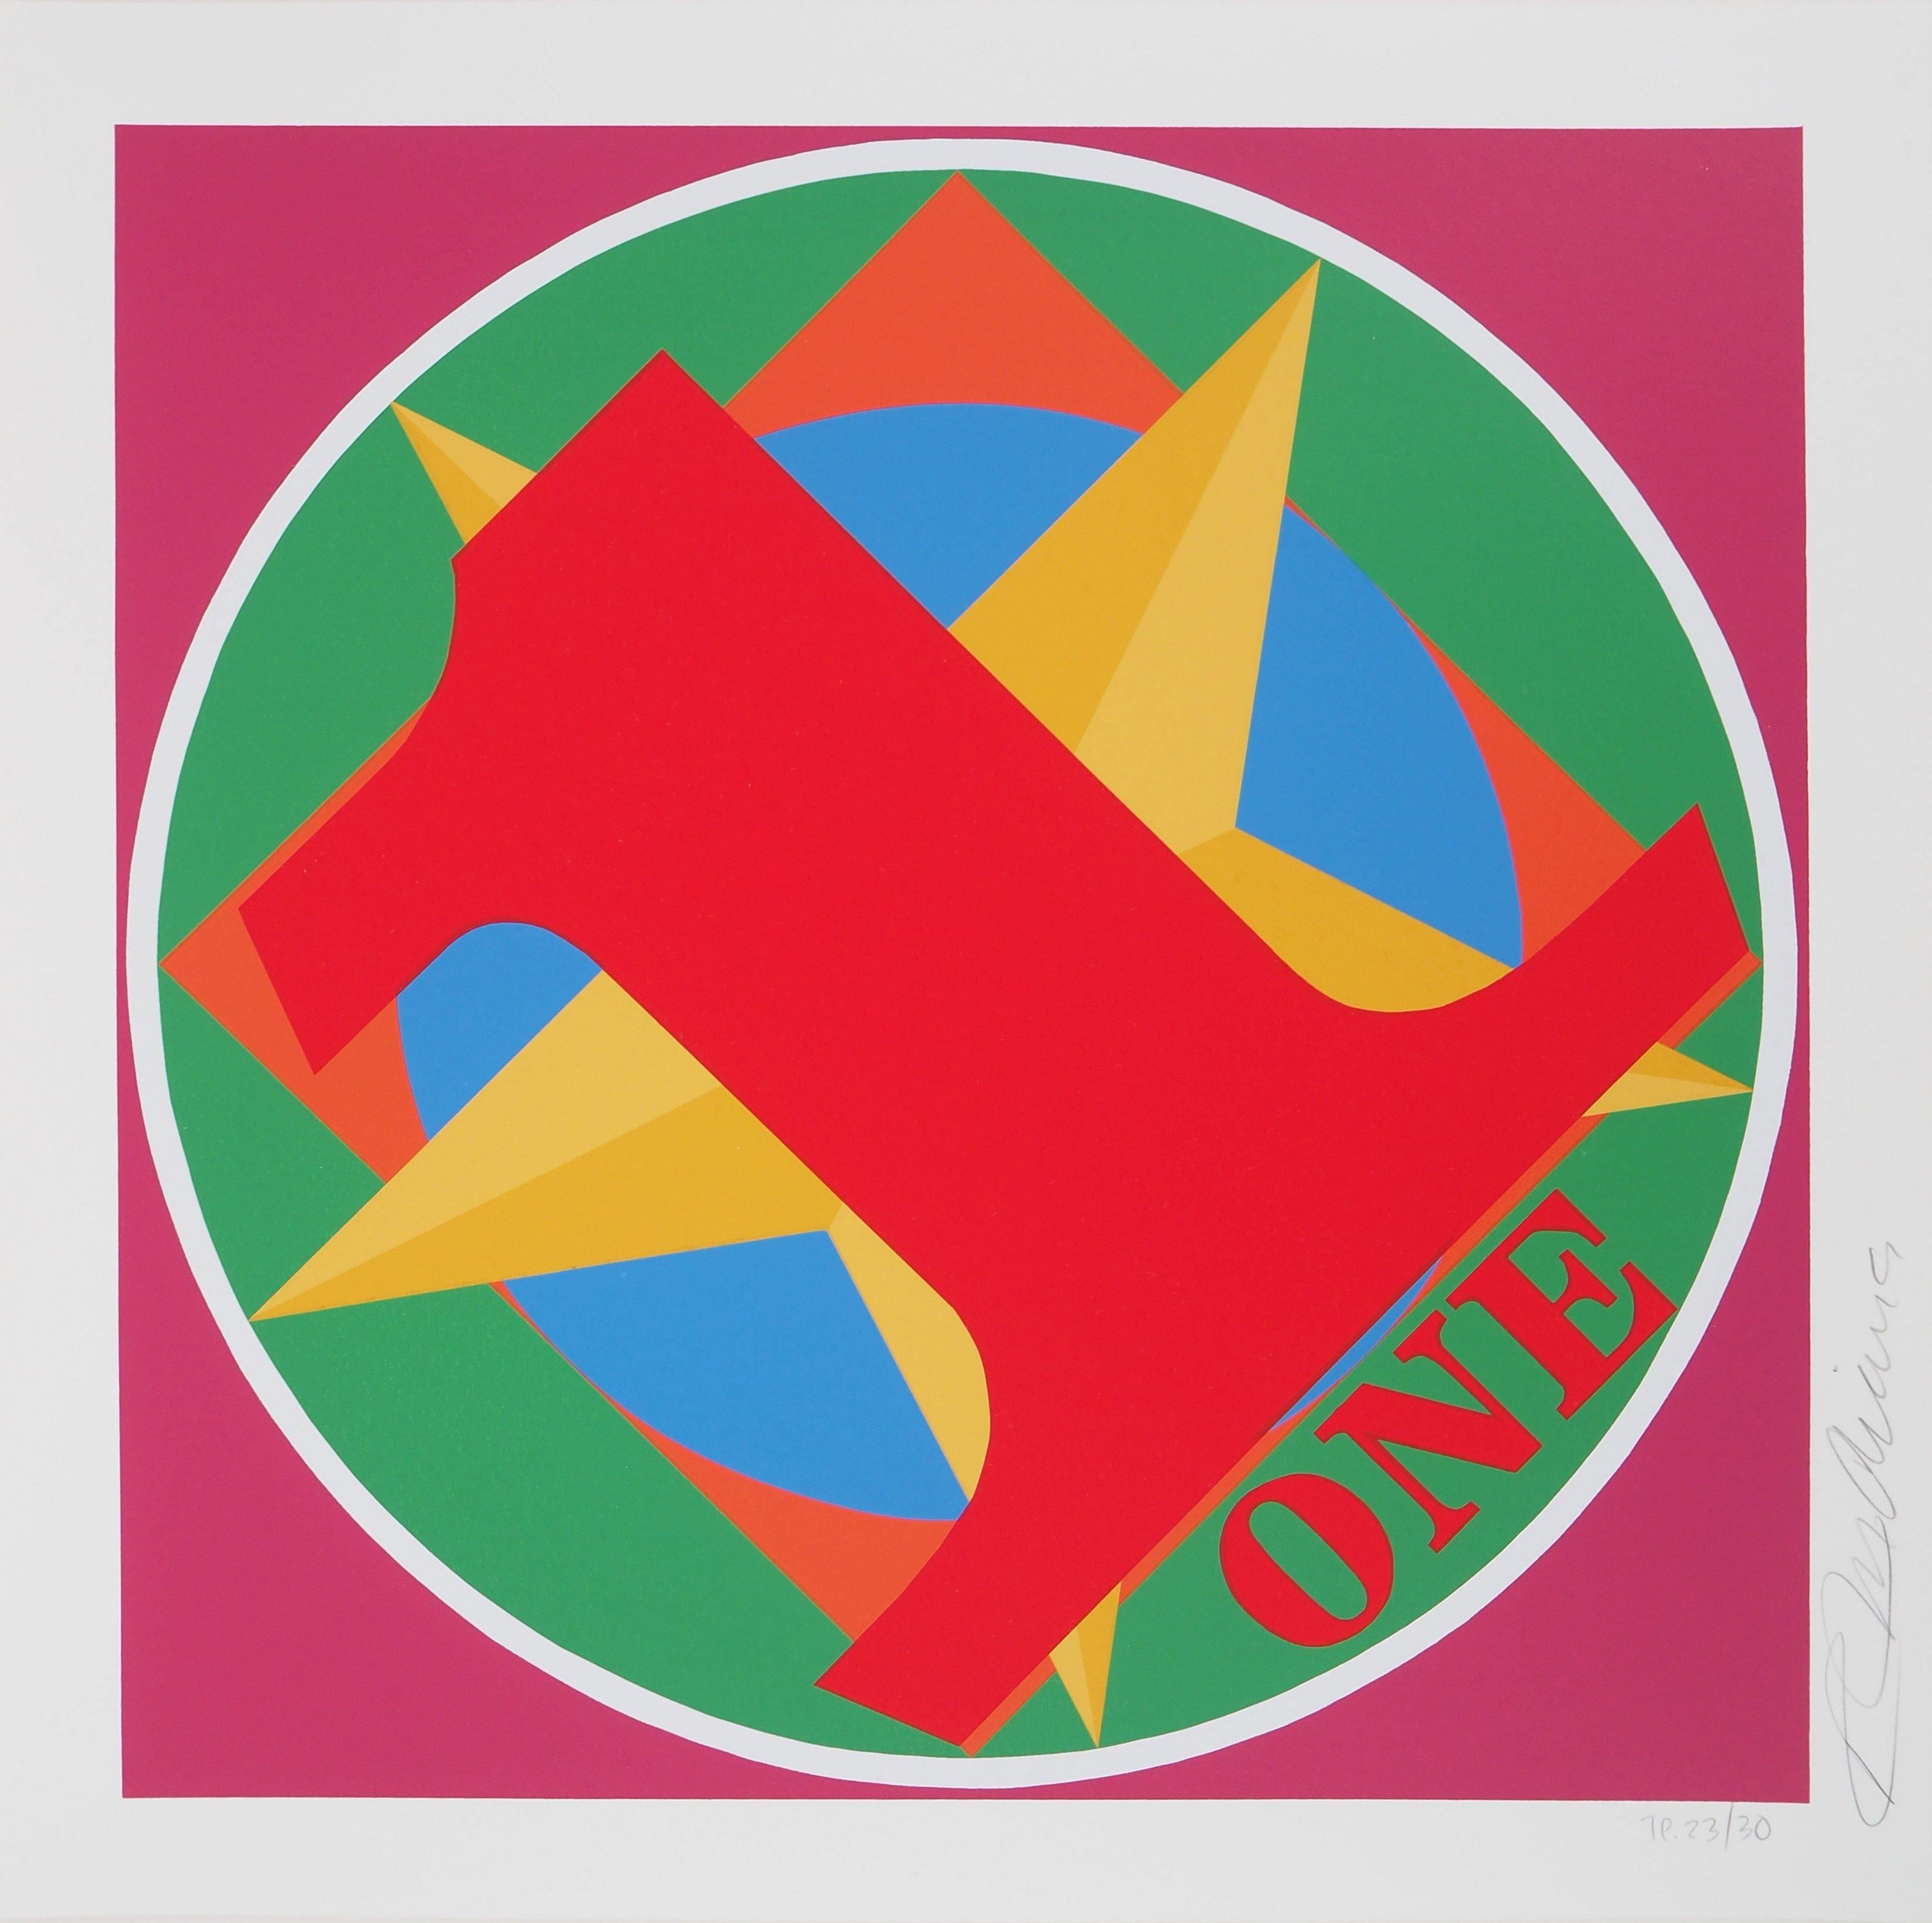 Robert Indiana Abstract Print - One Indiana Square - Original screenprint, Handsigned - Certificate